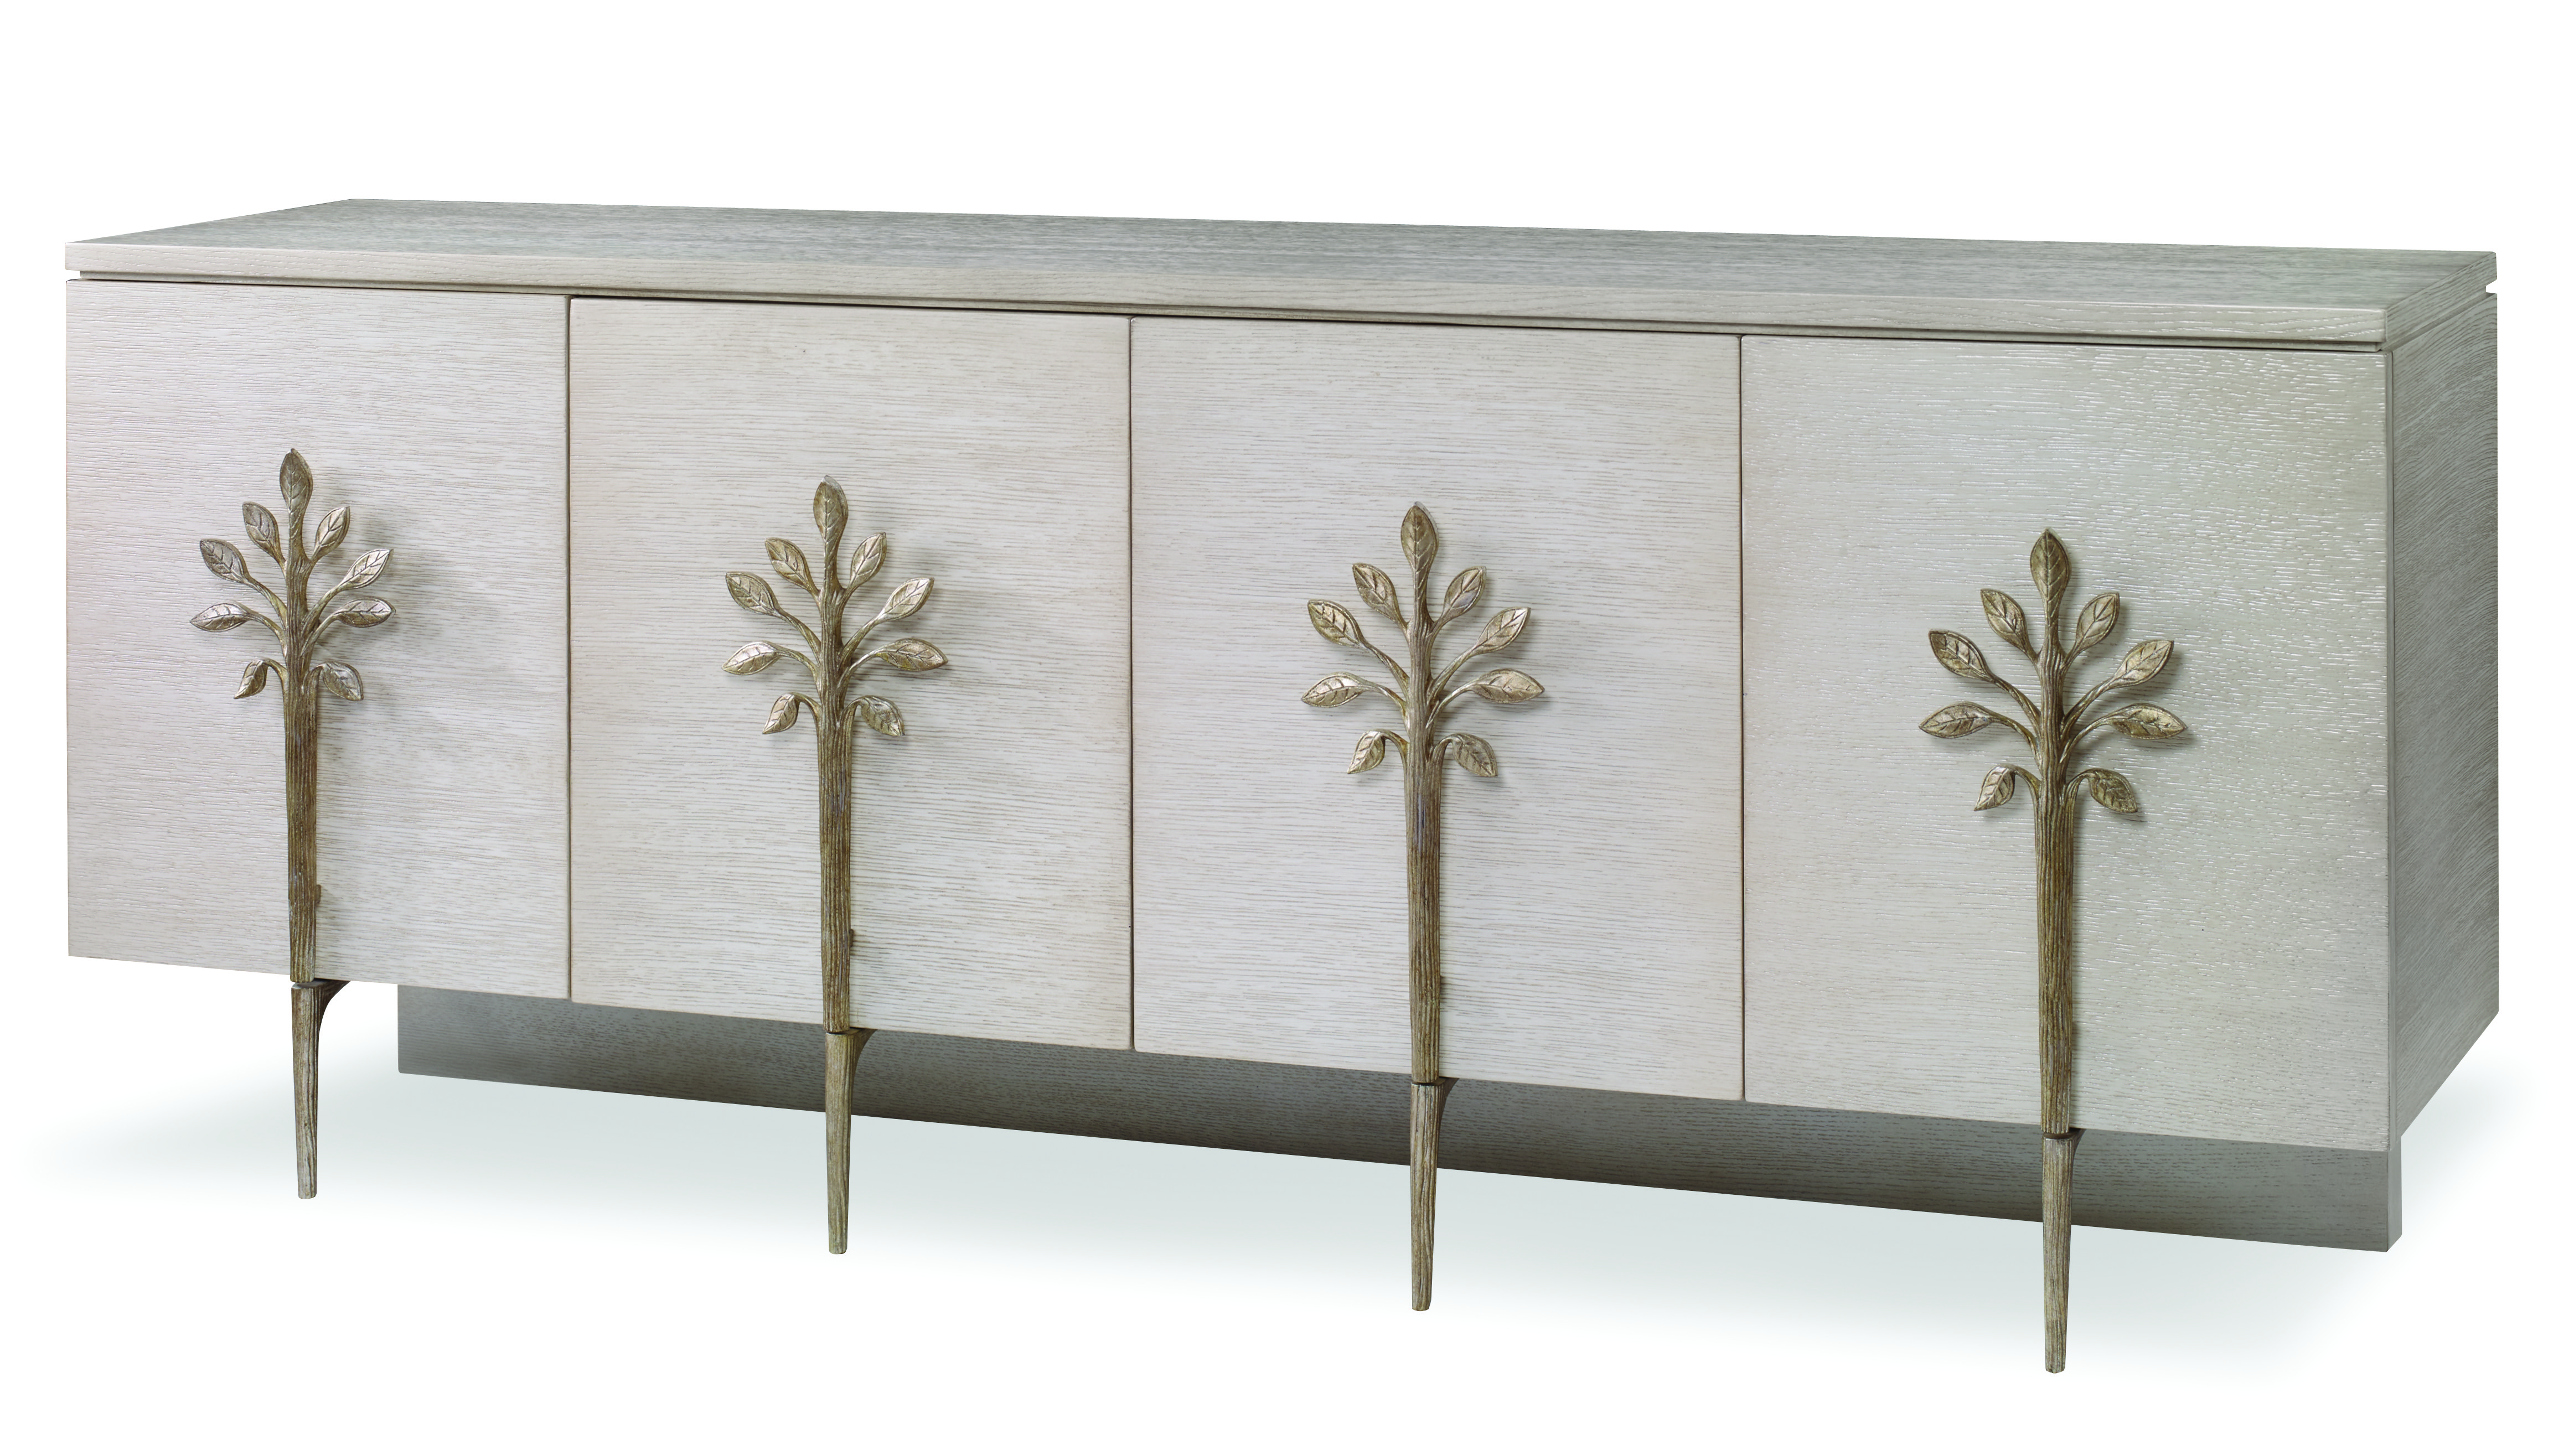 Sapling cabinet from Ambella Home